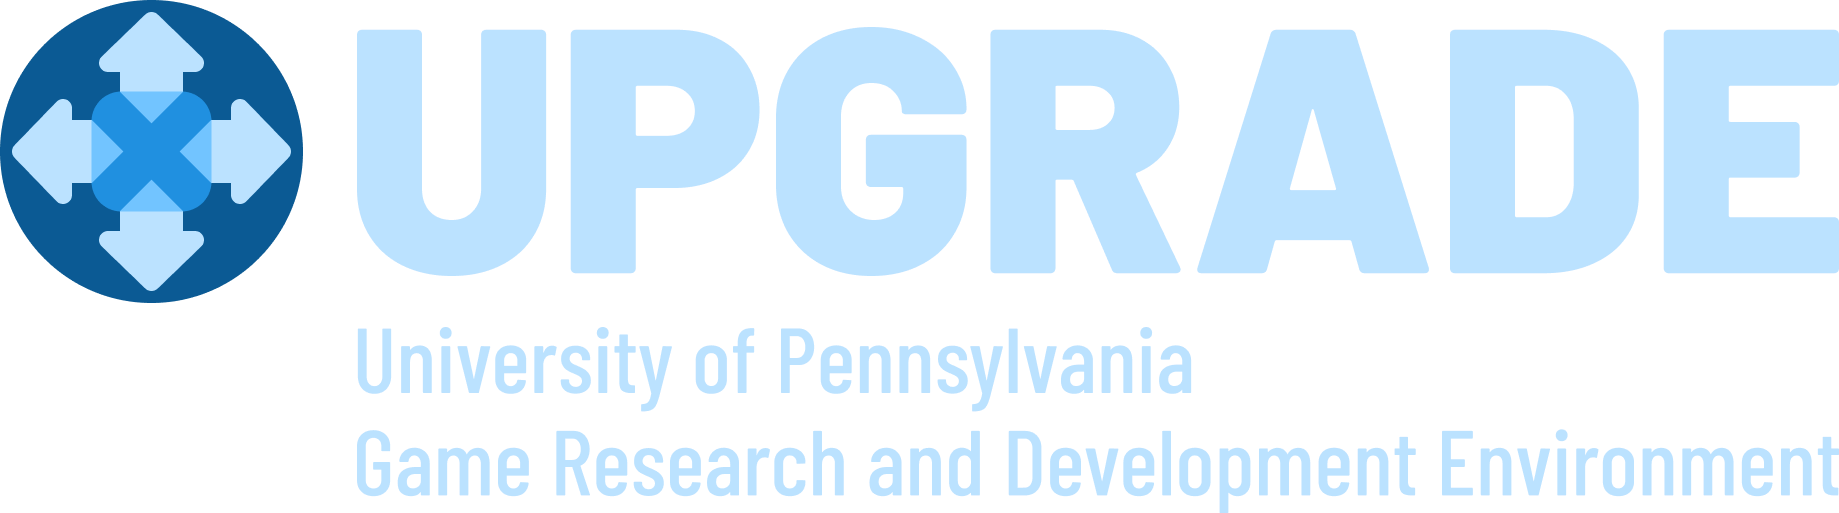 Full club logo. It says UPGRADE, and below it University of Pennsylvania Game and Research Development Environment.